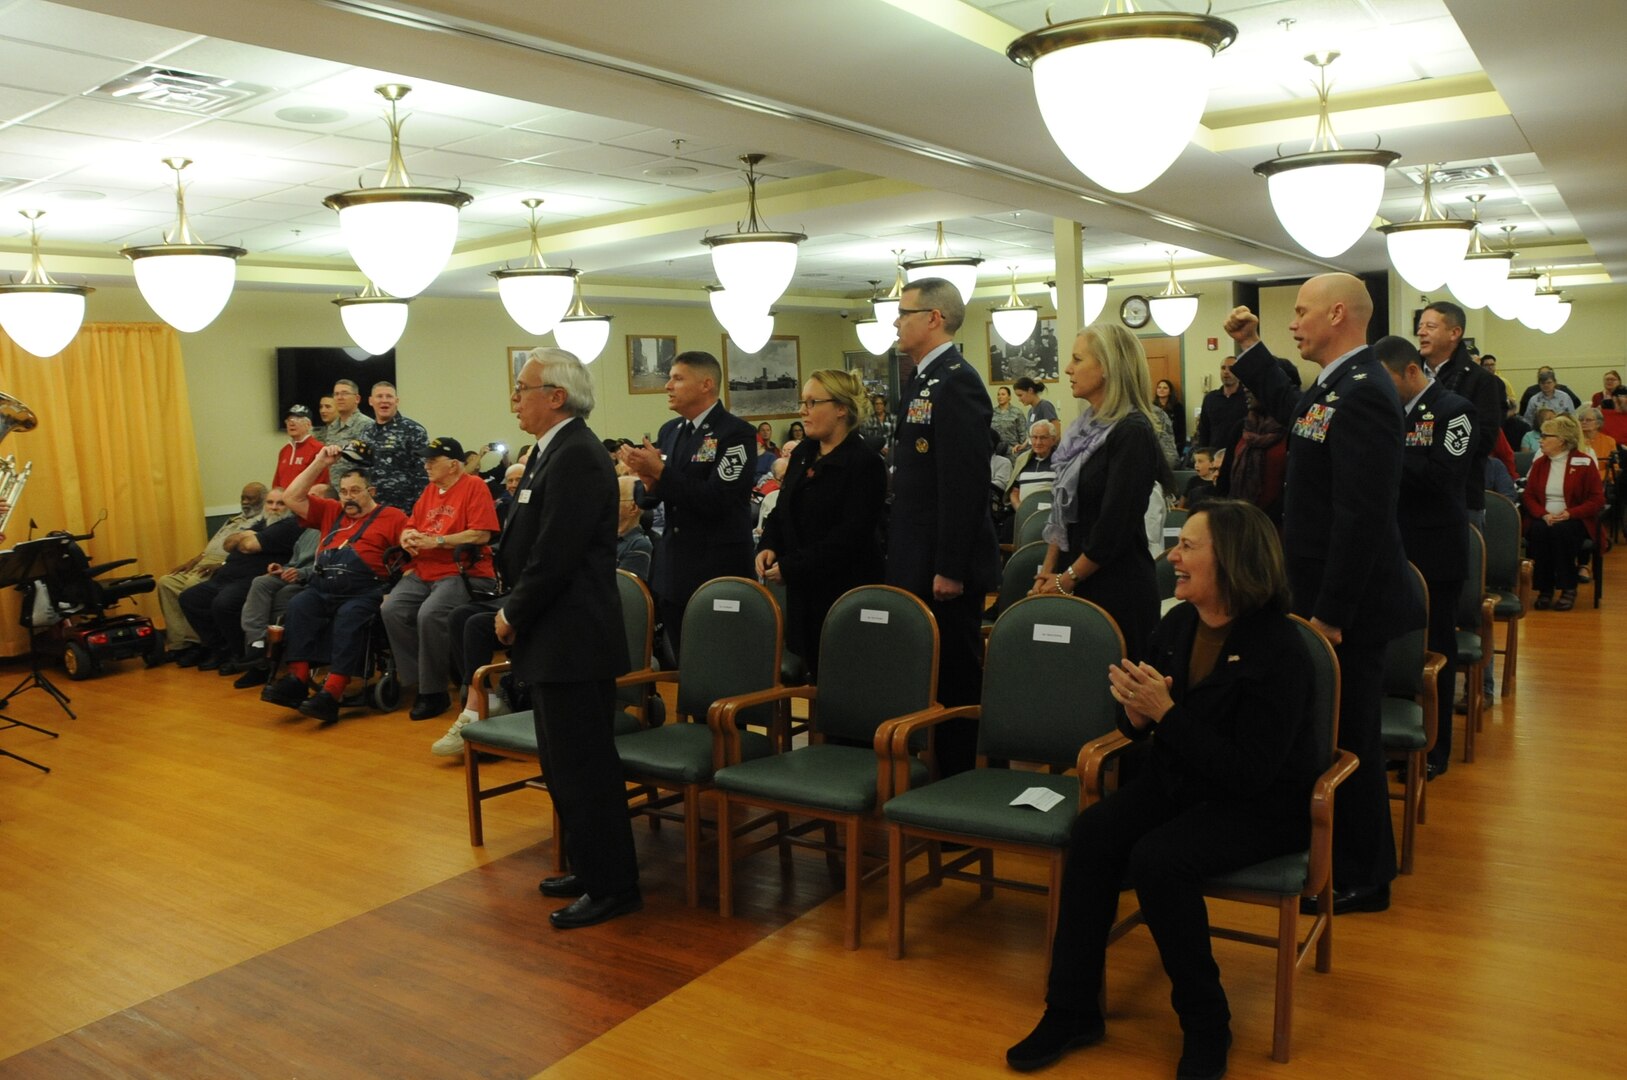 Senior leaders from U.S. Strategic Command (USSTRATCOM), the 55th Wing and the local community attend a Veterans Day ceremony at the Eastern Nebraska Veterans Home in Bellevue, Neb., Nov. 11, 2017. USSTRATCOM and 55th Wing leaders also participated in the 2017 Bellevue Veterans Day Parade and the annual ceremony at Memorial Park in Omaha to honor the service and sacrifice of American veterans and their families.